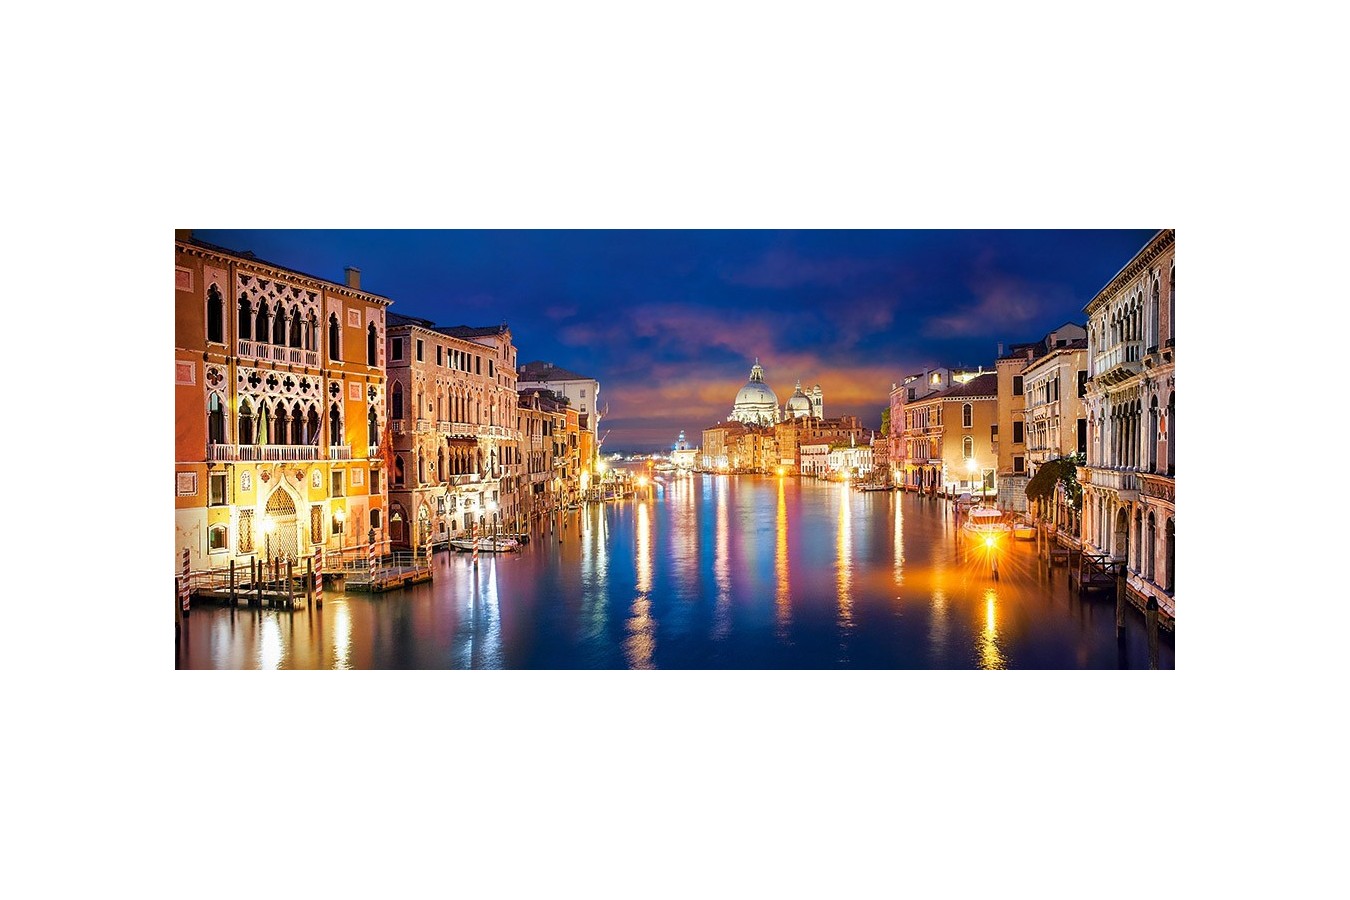 Puzzle Castorland Panoramic - The Grand Canal By Night Venice, 600 Piese